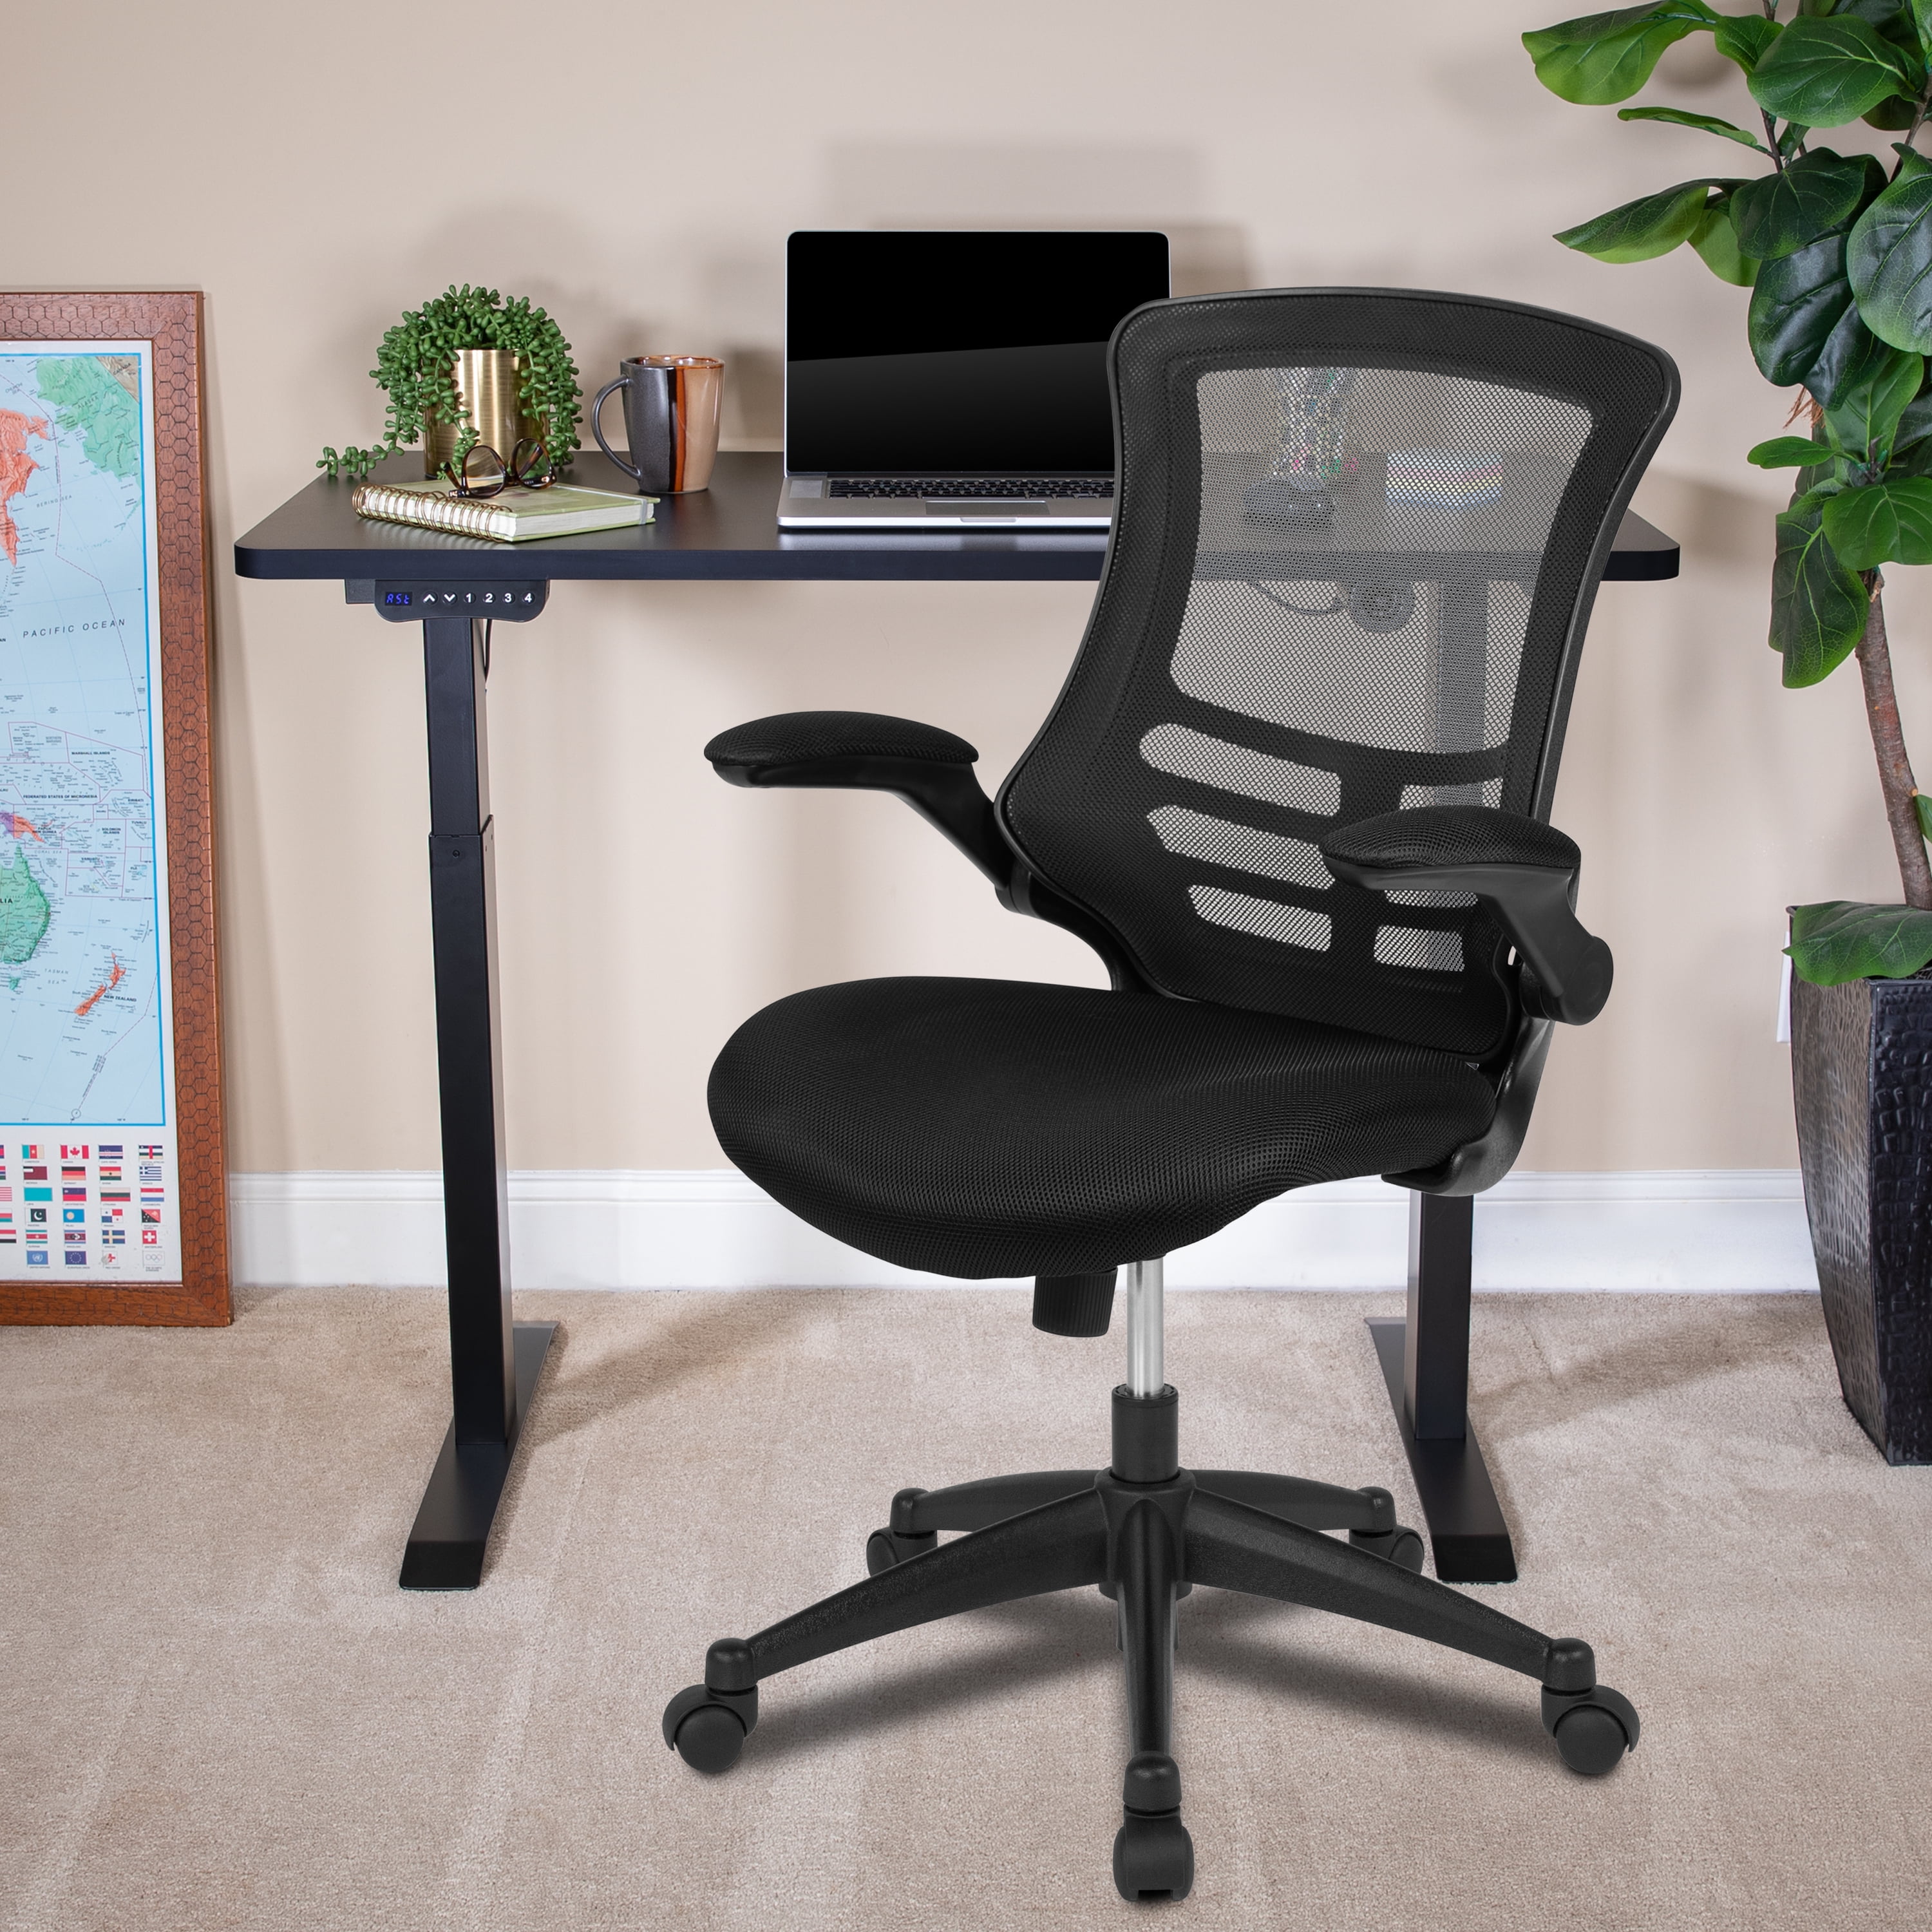 Flash Furniture 48"W x 24"D Black Electric Height Adjustable Standing Desk with Black Mesh Swivel Ergonomic Task Office Chair -Brand New